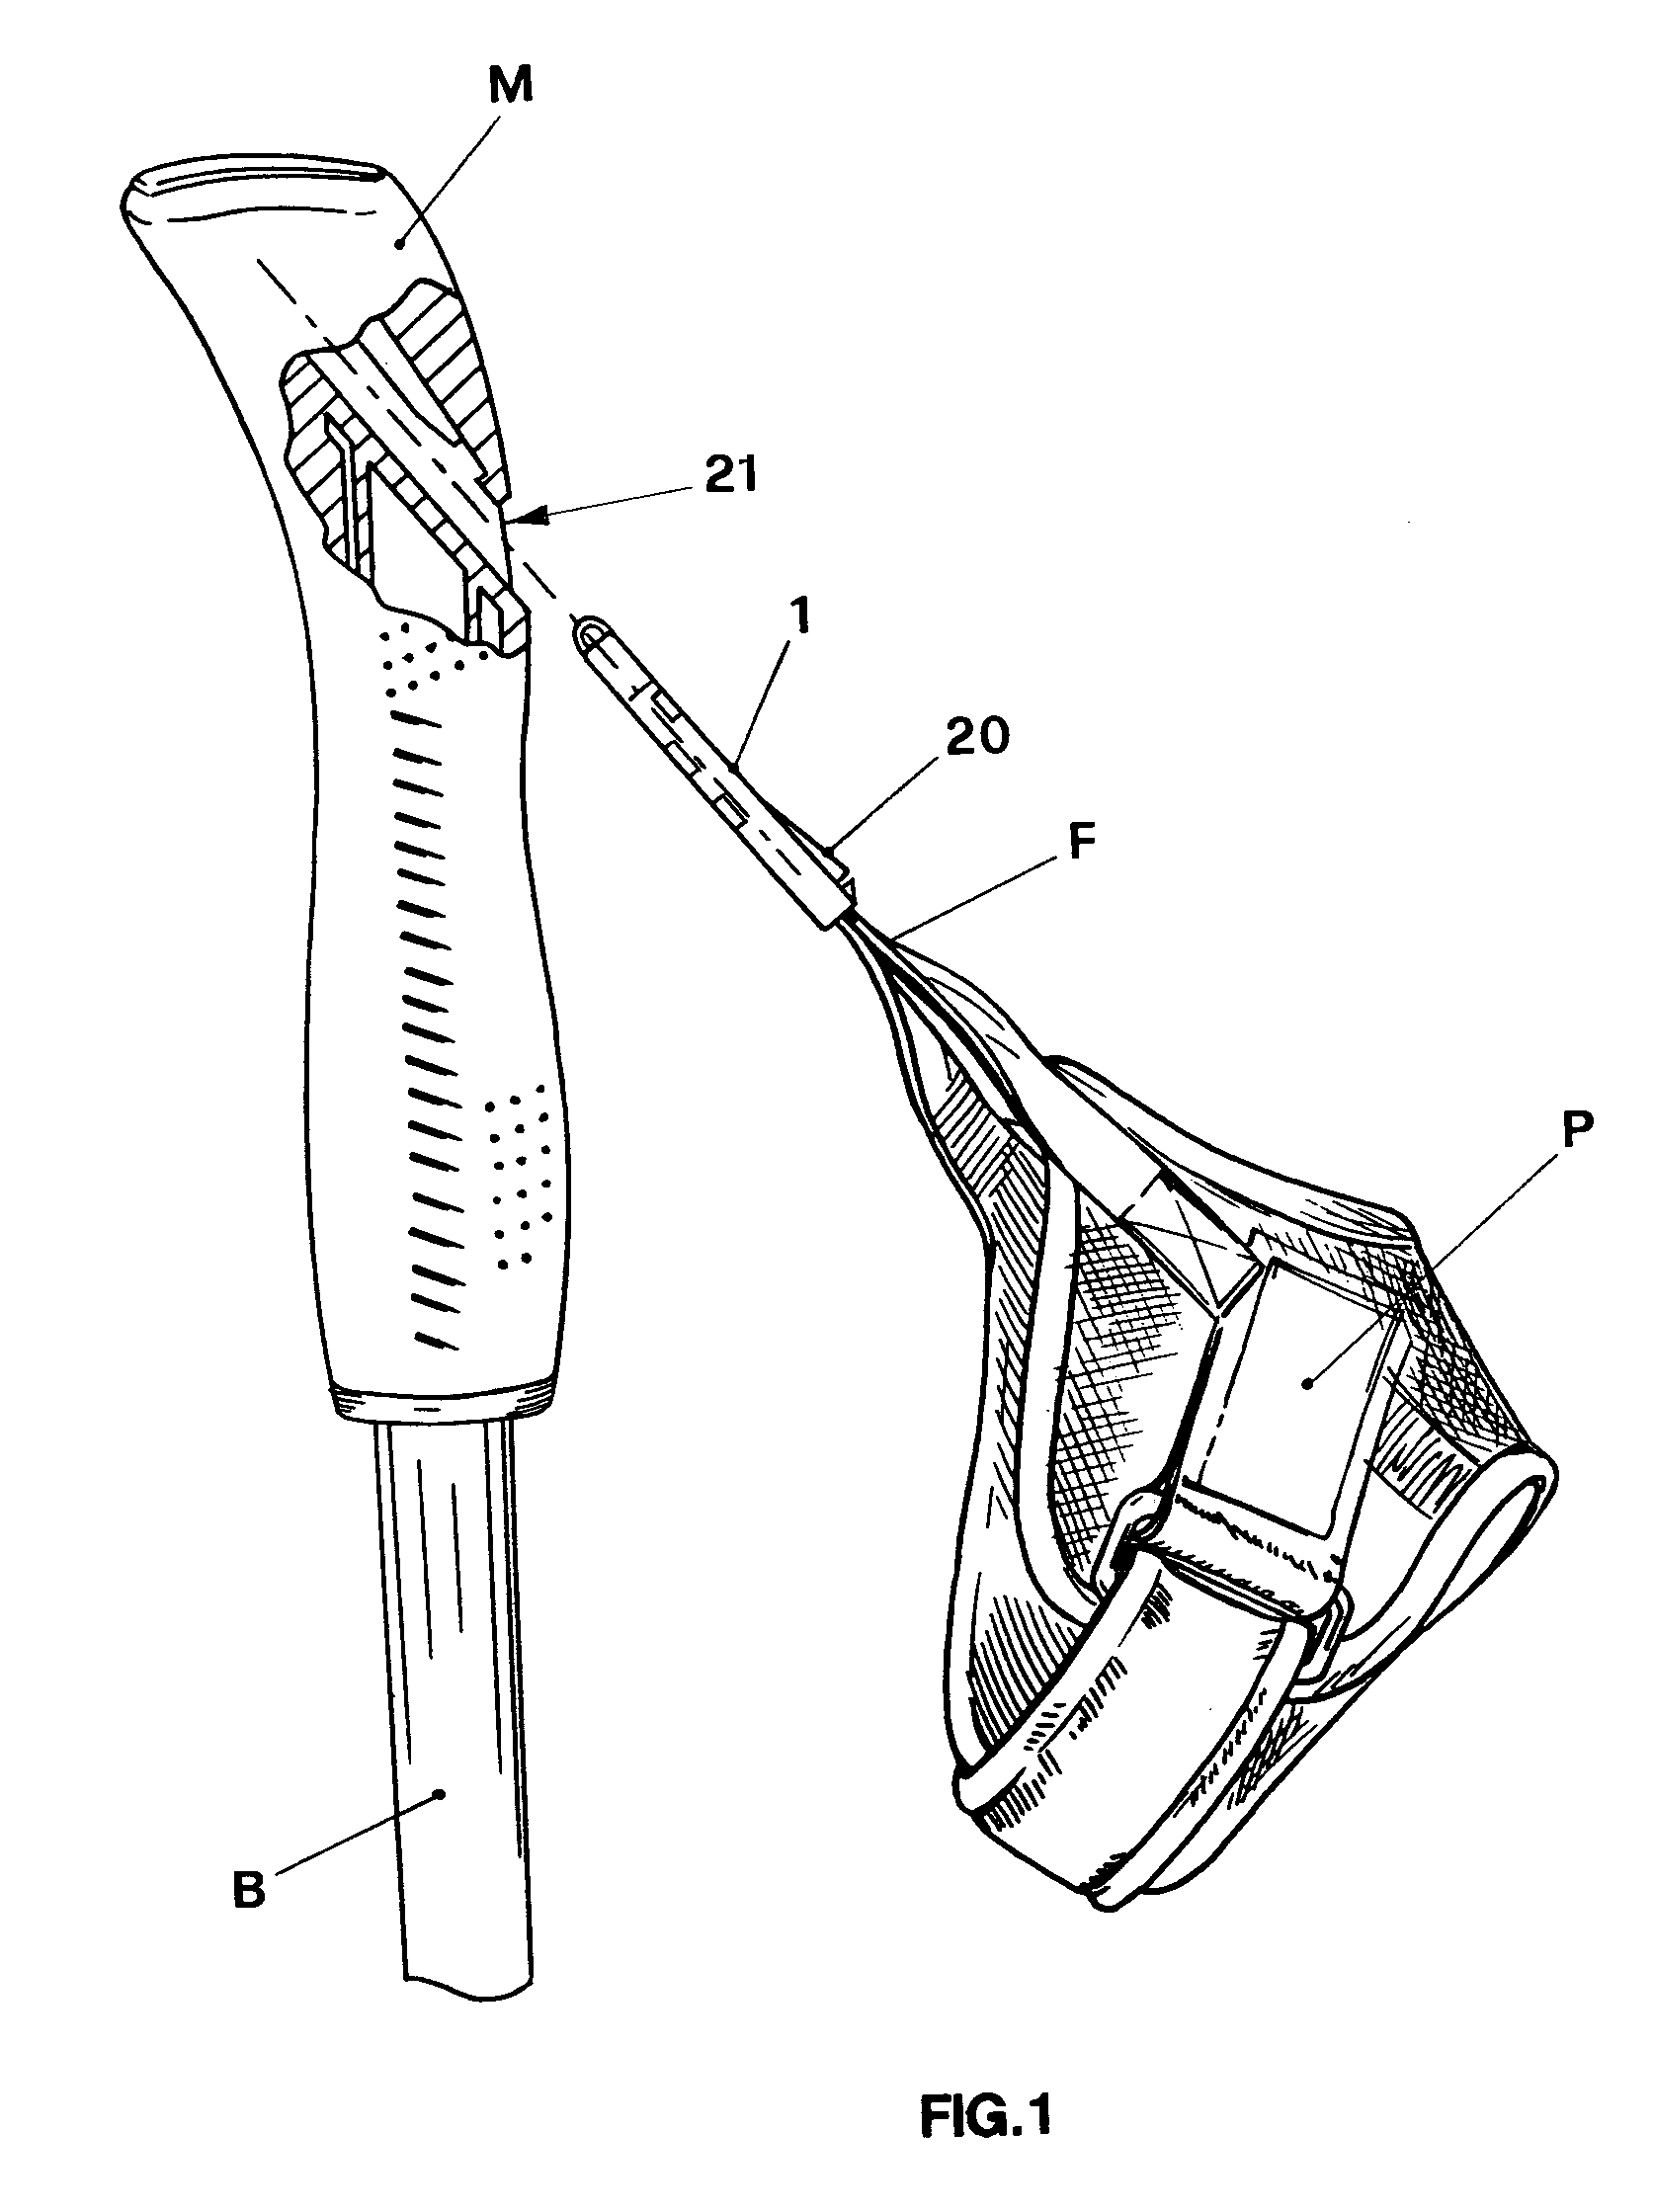 Buckle for connecting a wrist strap to the handgrip of a pole for use in sporting activities